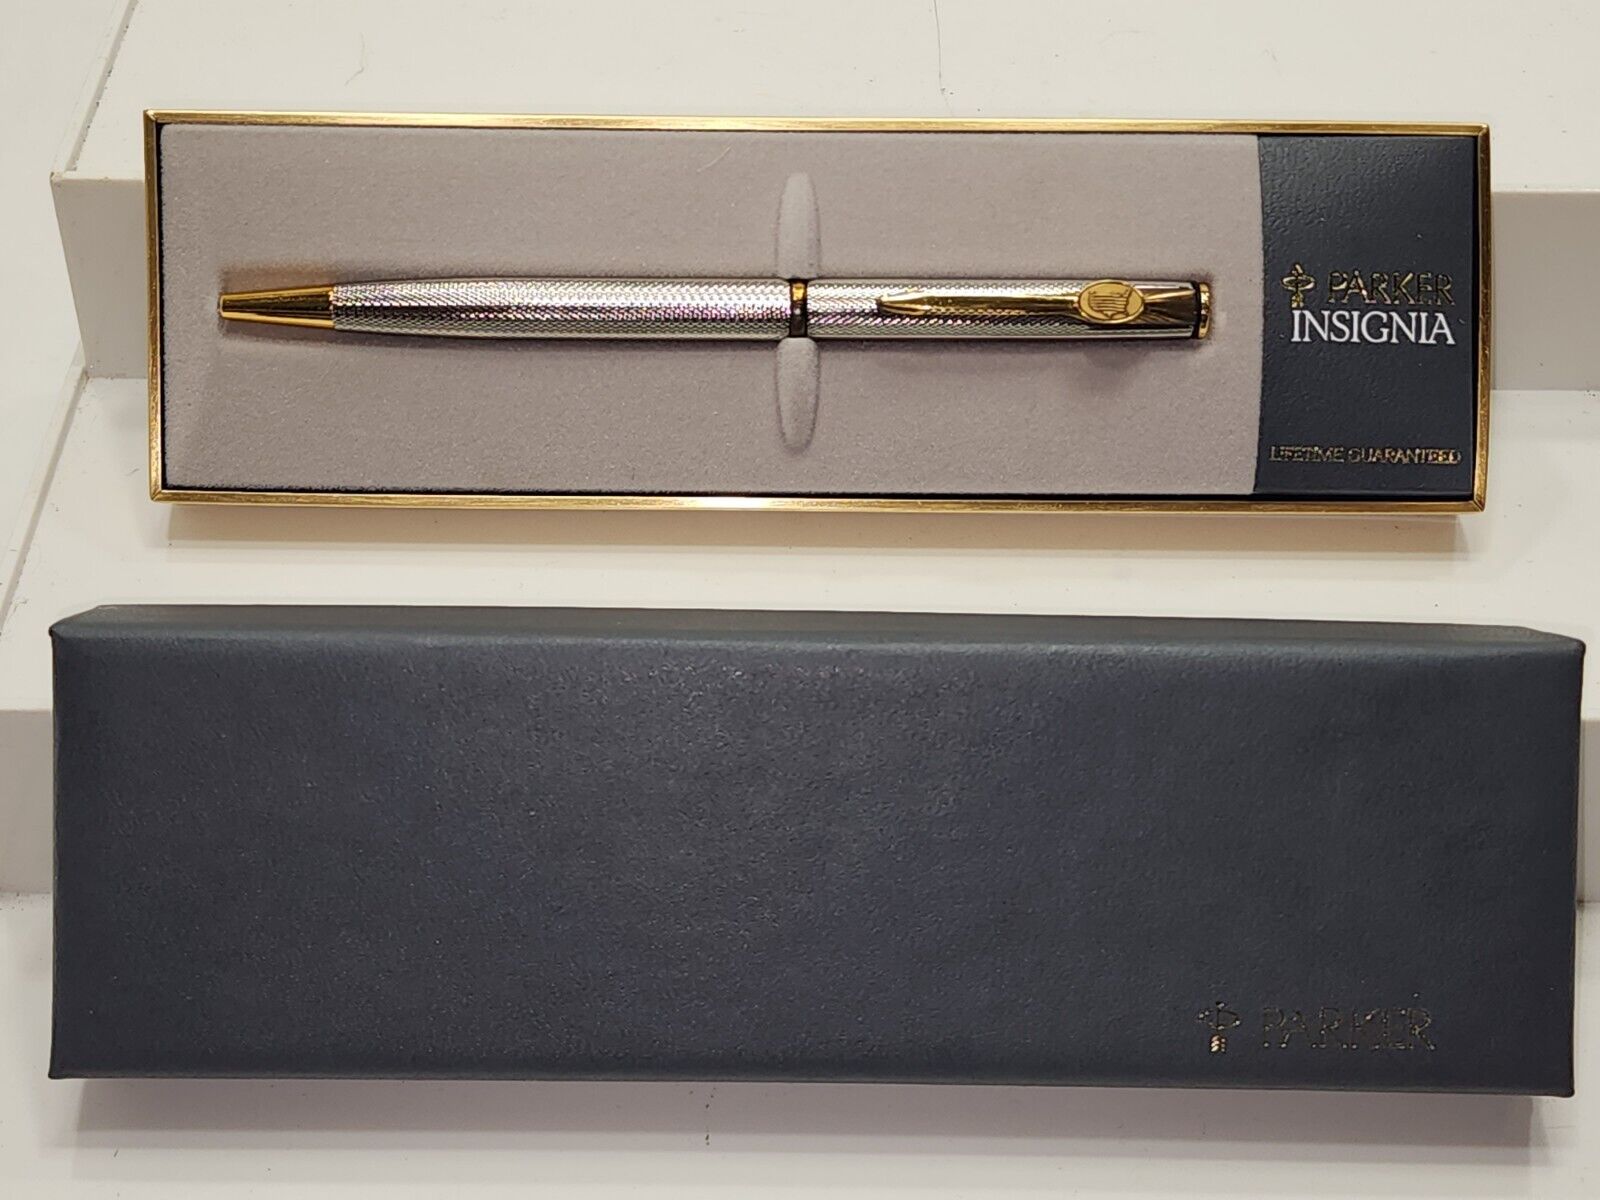 Vintage Parker Insignia Silver Plated Ball Point Pen Black Ink In Gift Box